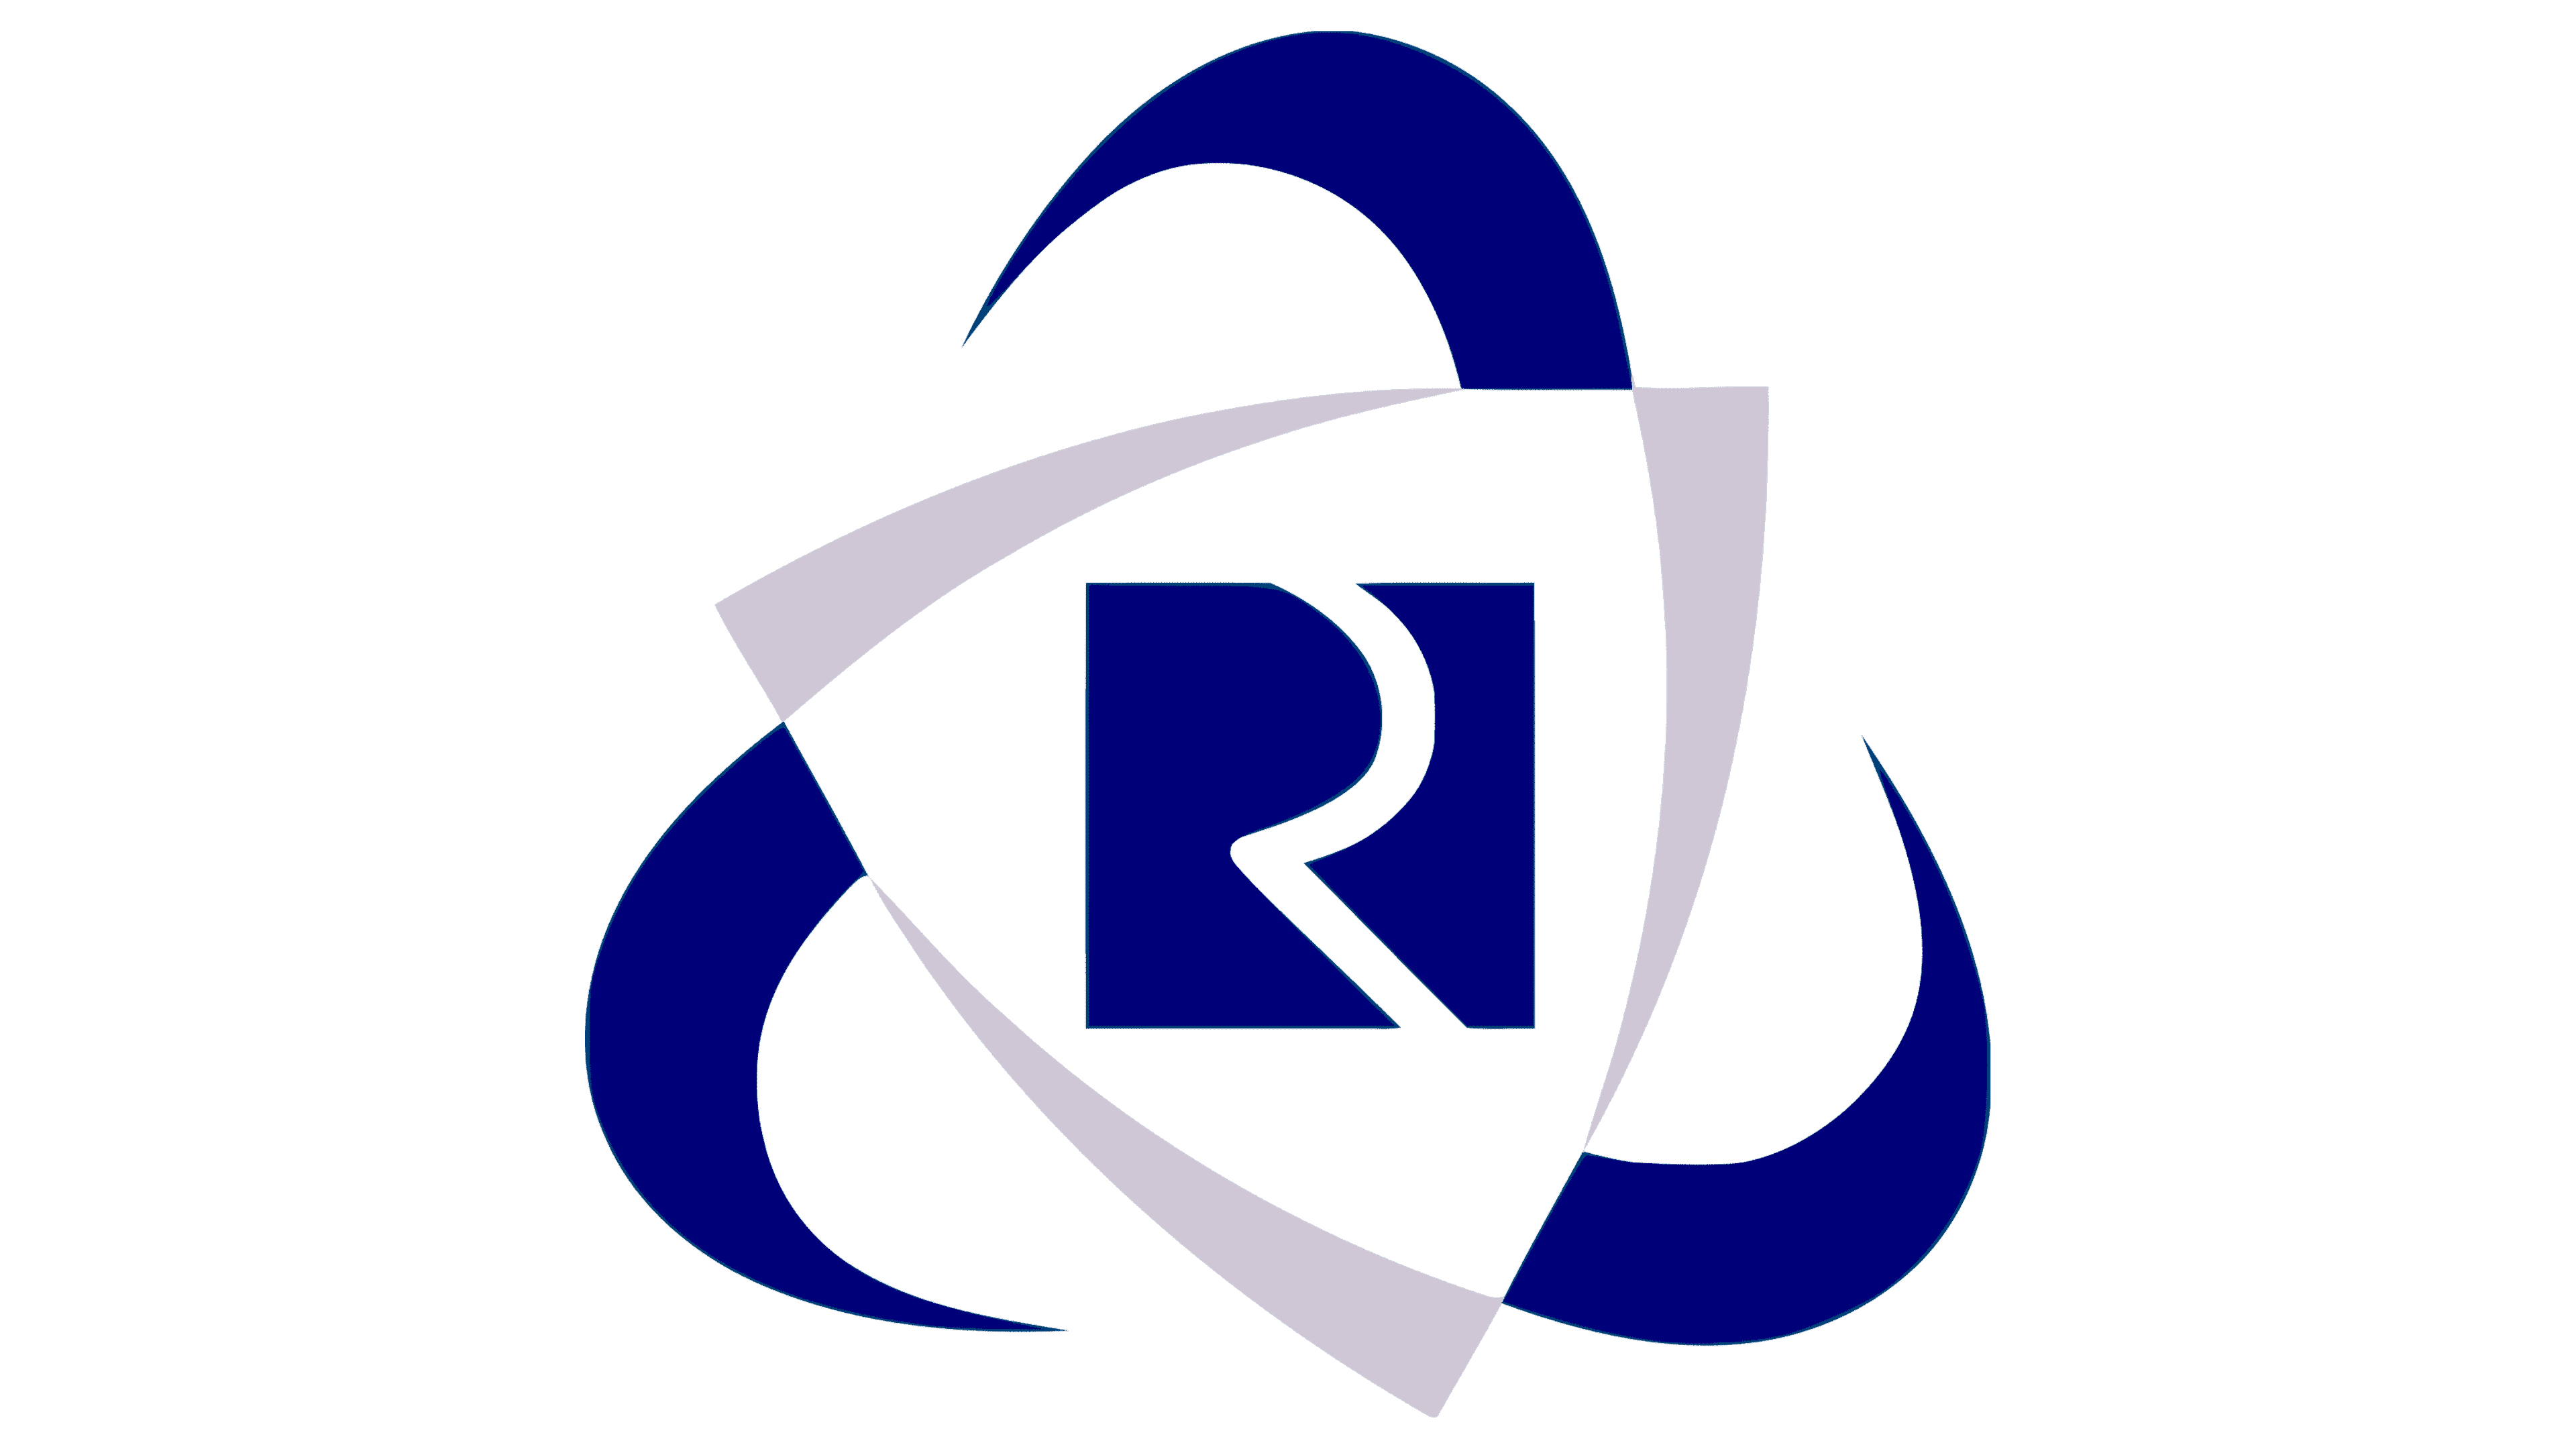 IRCTC Logo, PNG, Symbol, History, Meaning